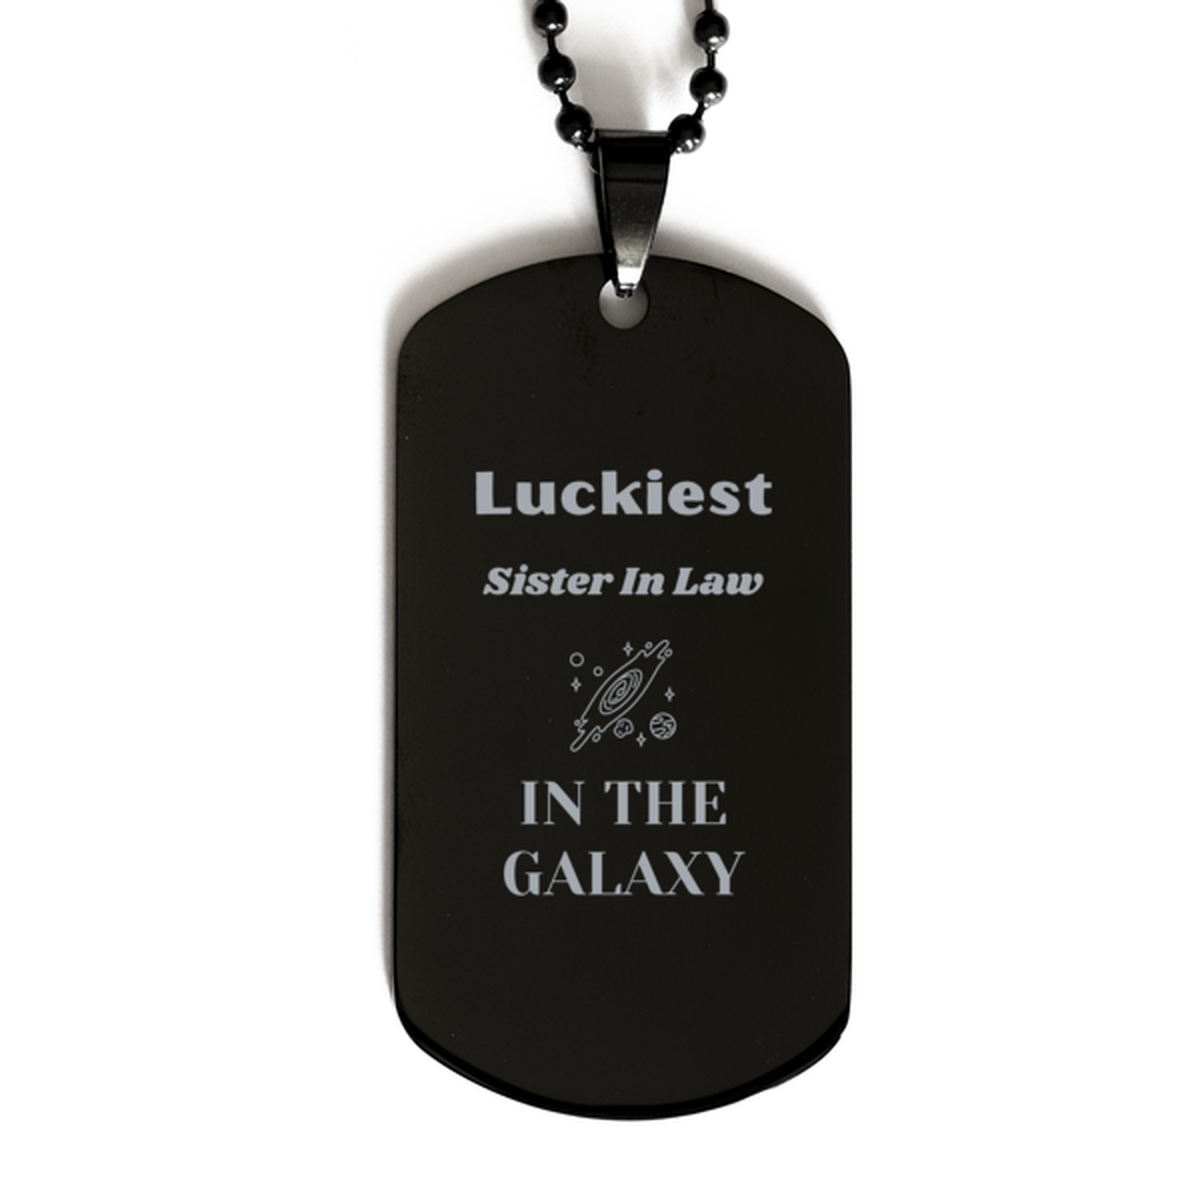 Luckiest Sister In Law in the Galaxy, To My Sister In Law Engraved Gifts, Christmas Sister In Law Black Dog Tag Gifts, X-mas Birthday Unique Gifts For Sister In Law Men Women